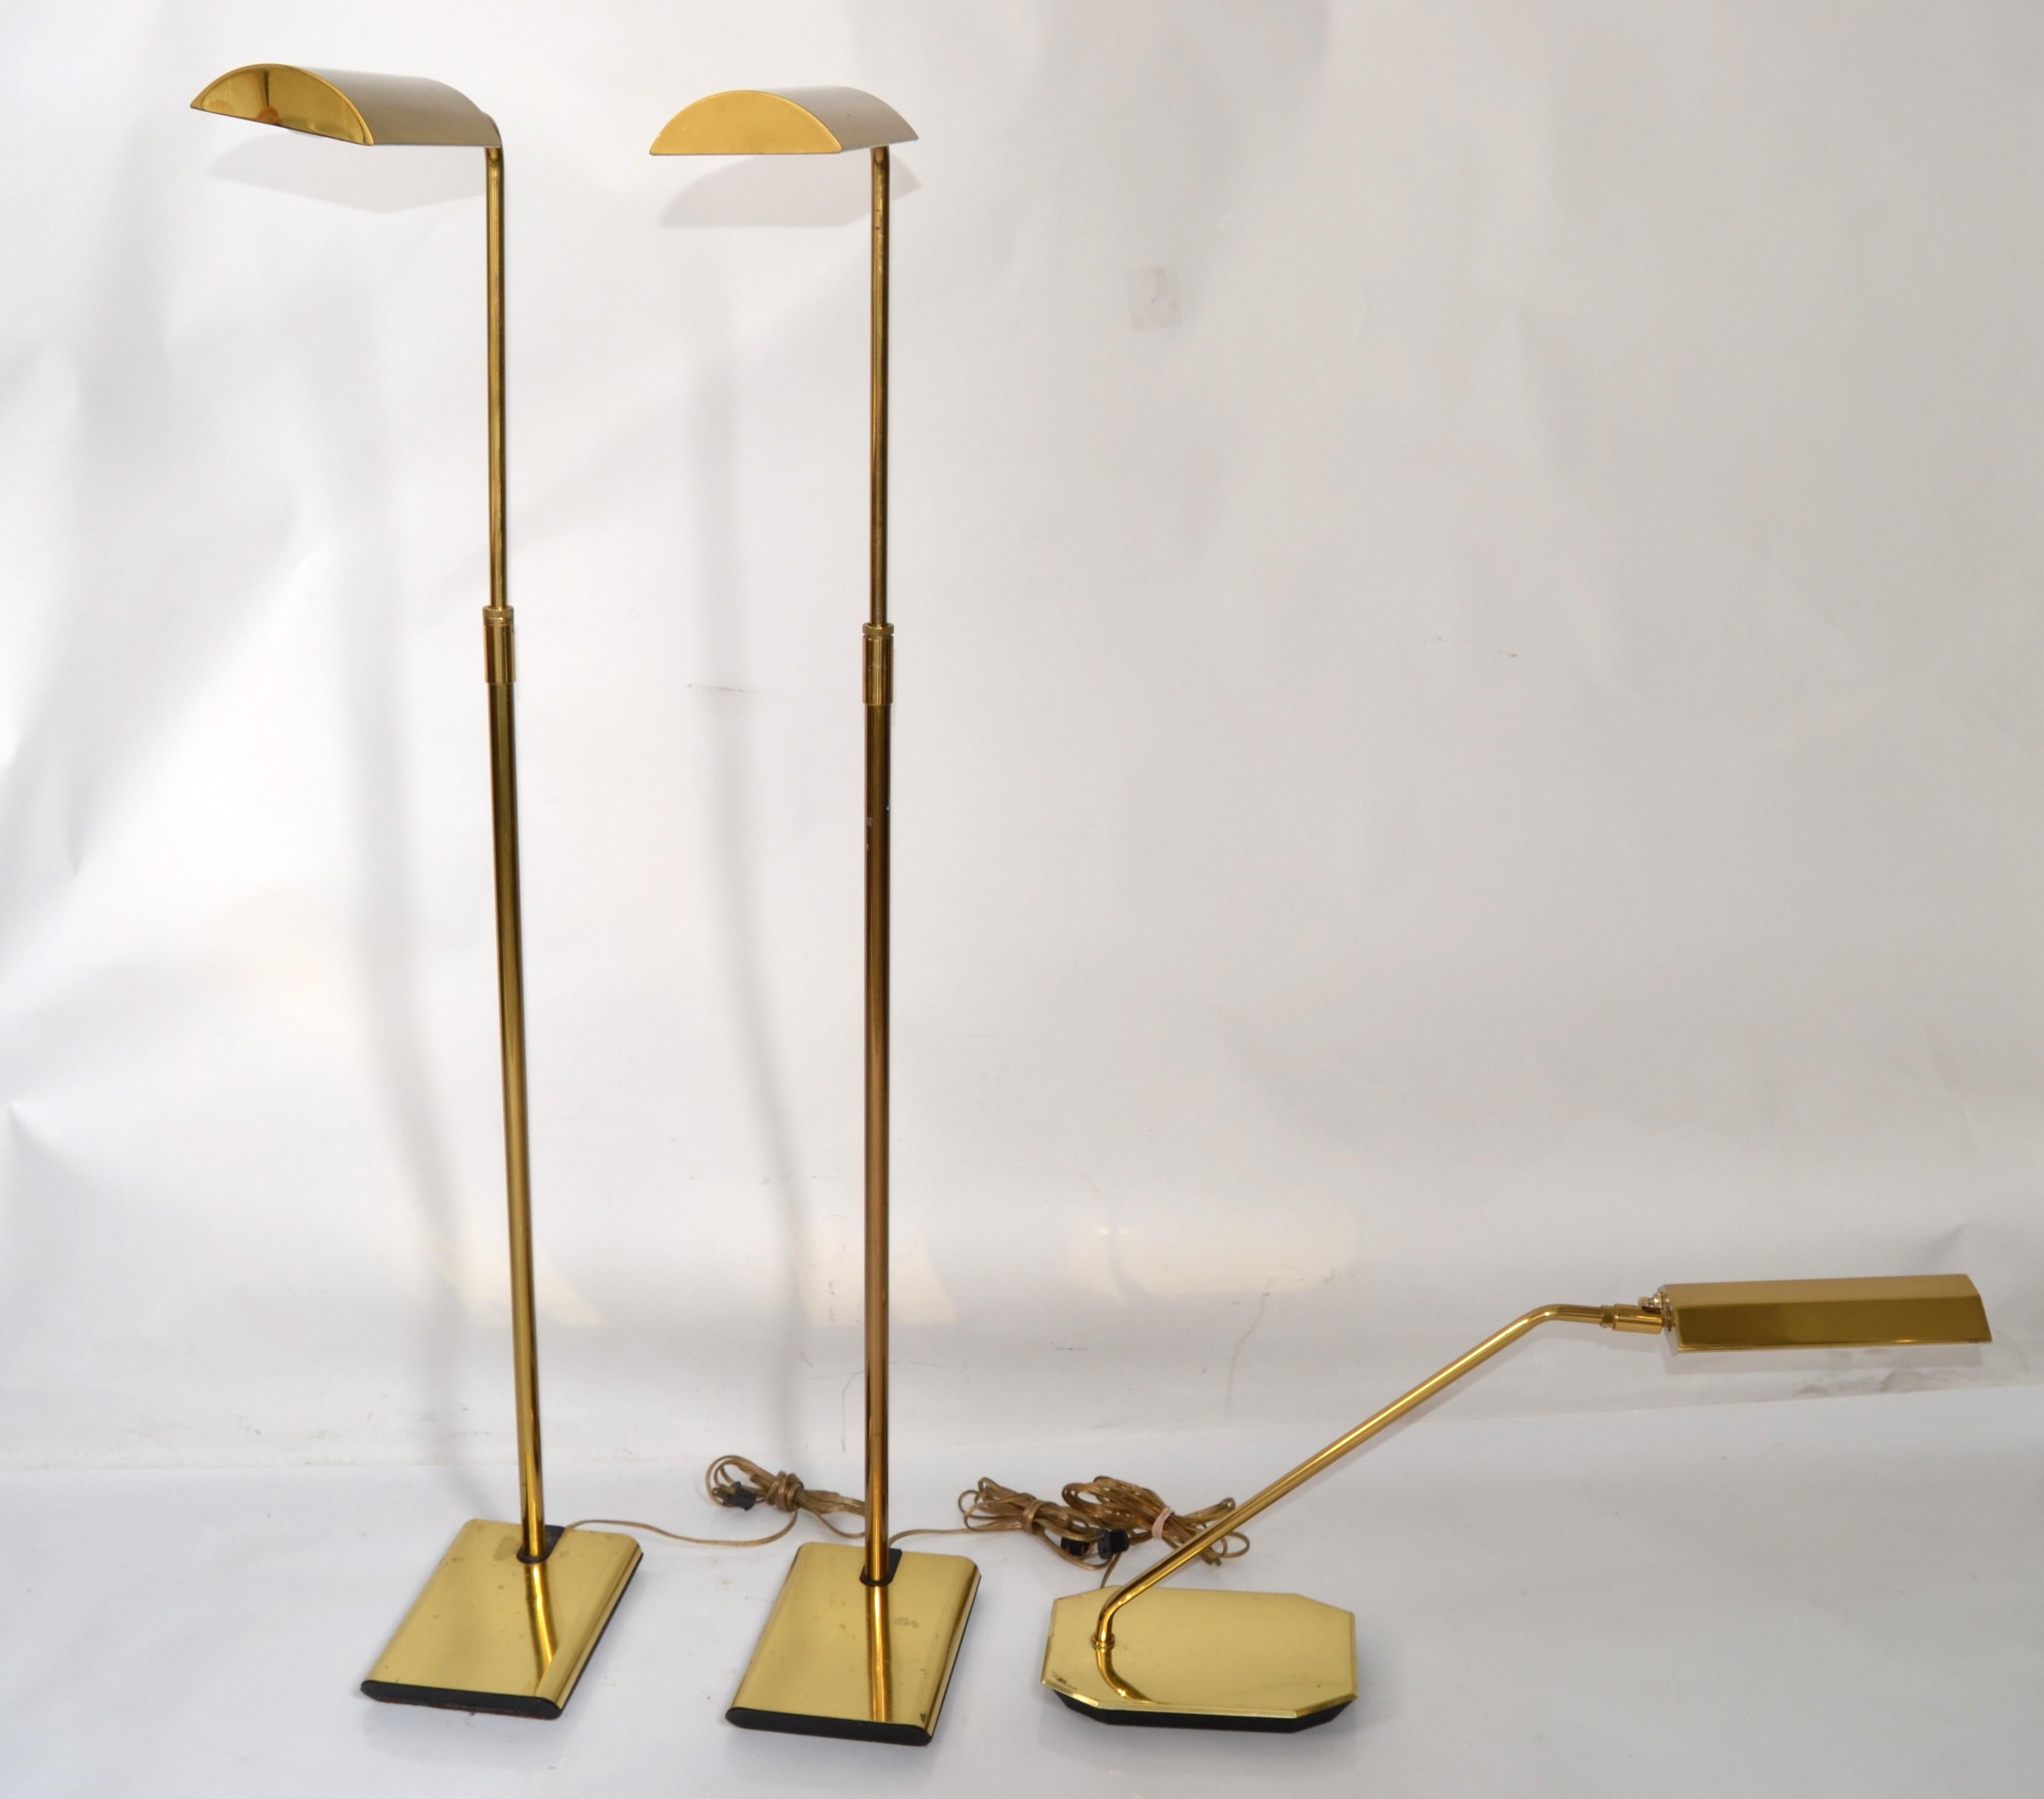 Metal Pair Koch & Lowy Articulated Polished Brass Floor Lamps Mid-Century Modern 1965 For Sale